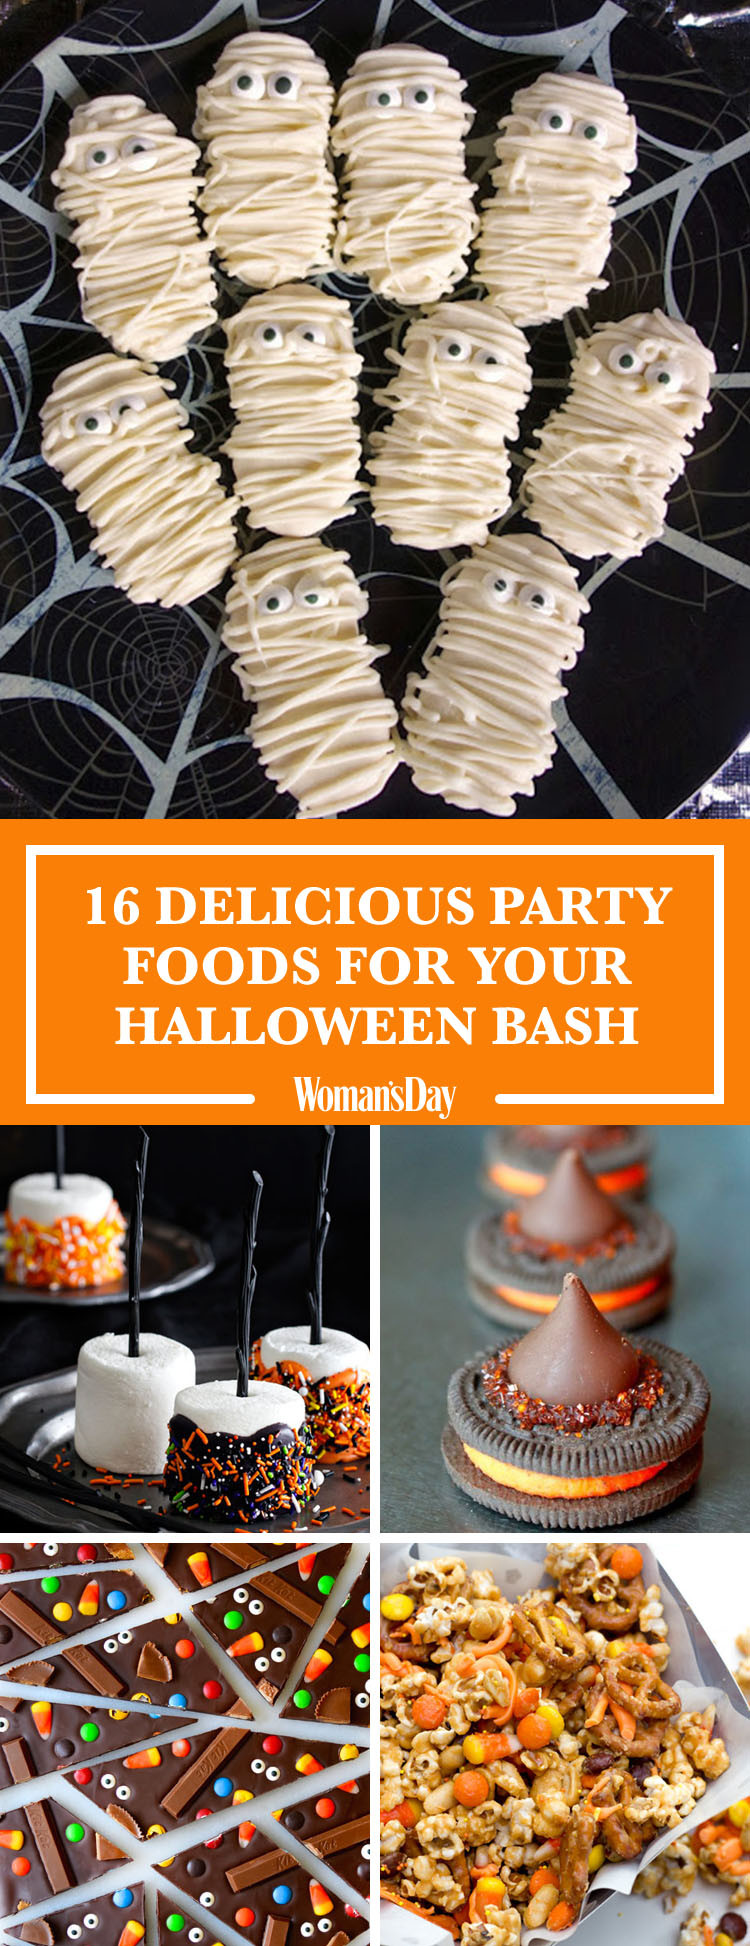 Halloween Party Recipes Ideas
 22 Easy Halloween Party Food Ideas Cute Recipes for